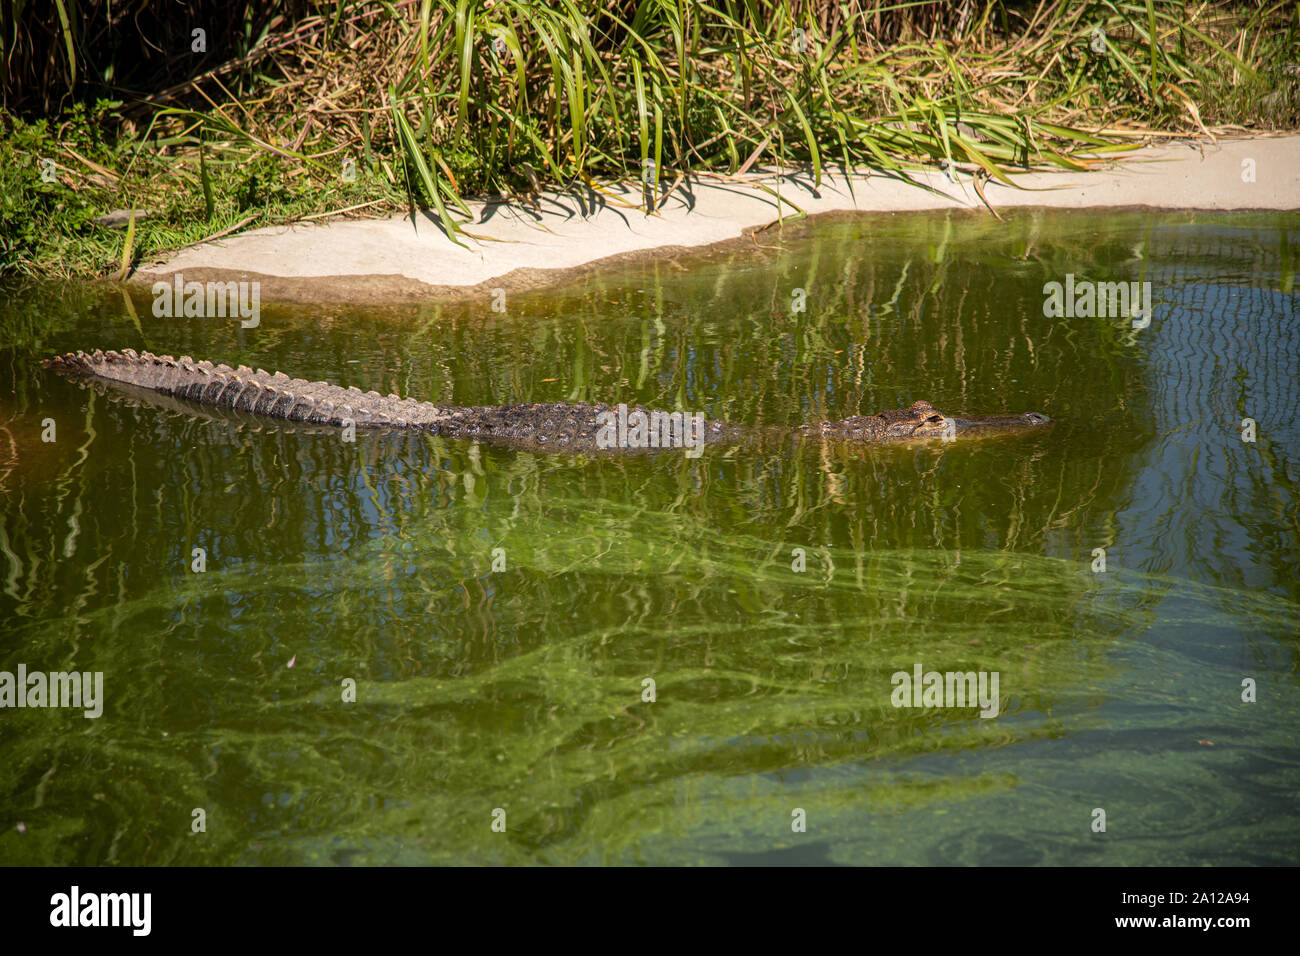 An American alligator partially submerged in a pond at a private zoo in Michigan. Stock Photo